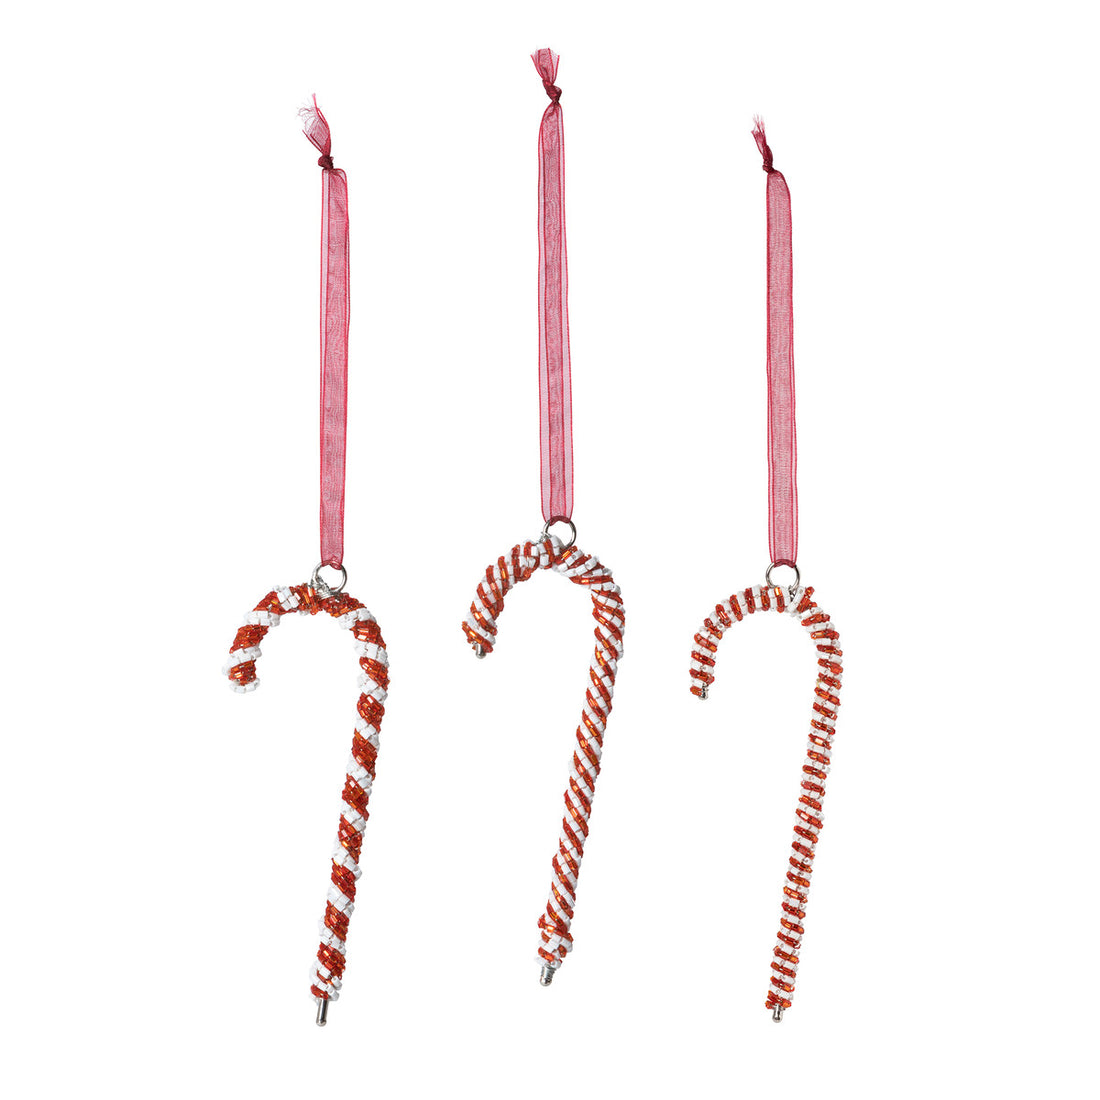 Three Park Hill Beaded Candy Cane Ornaments hanging on a string, adorned with beaded accents.